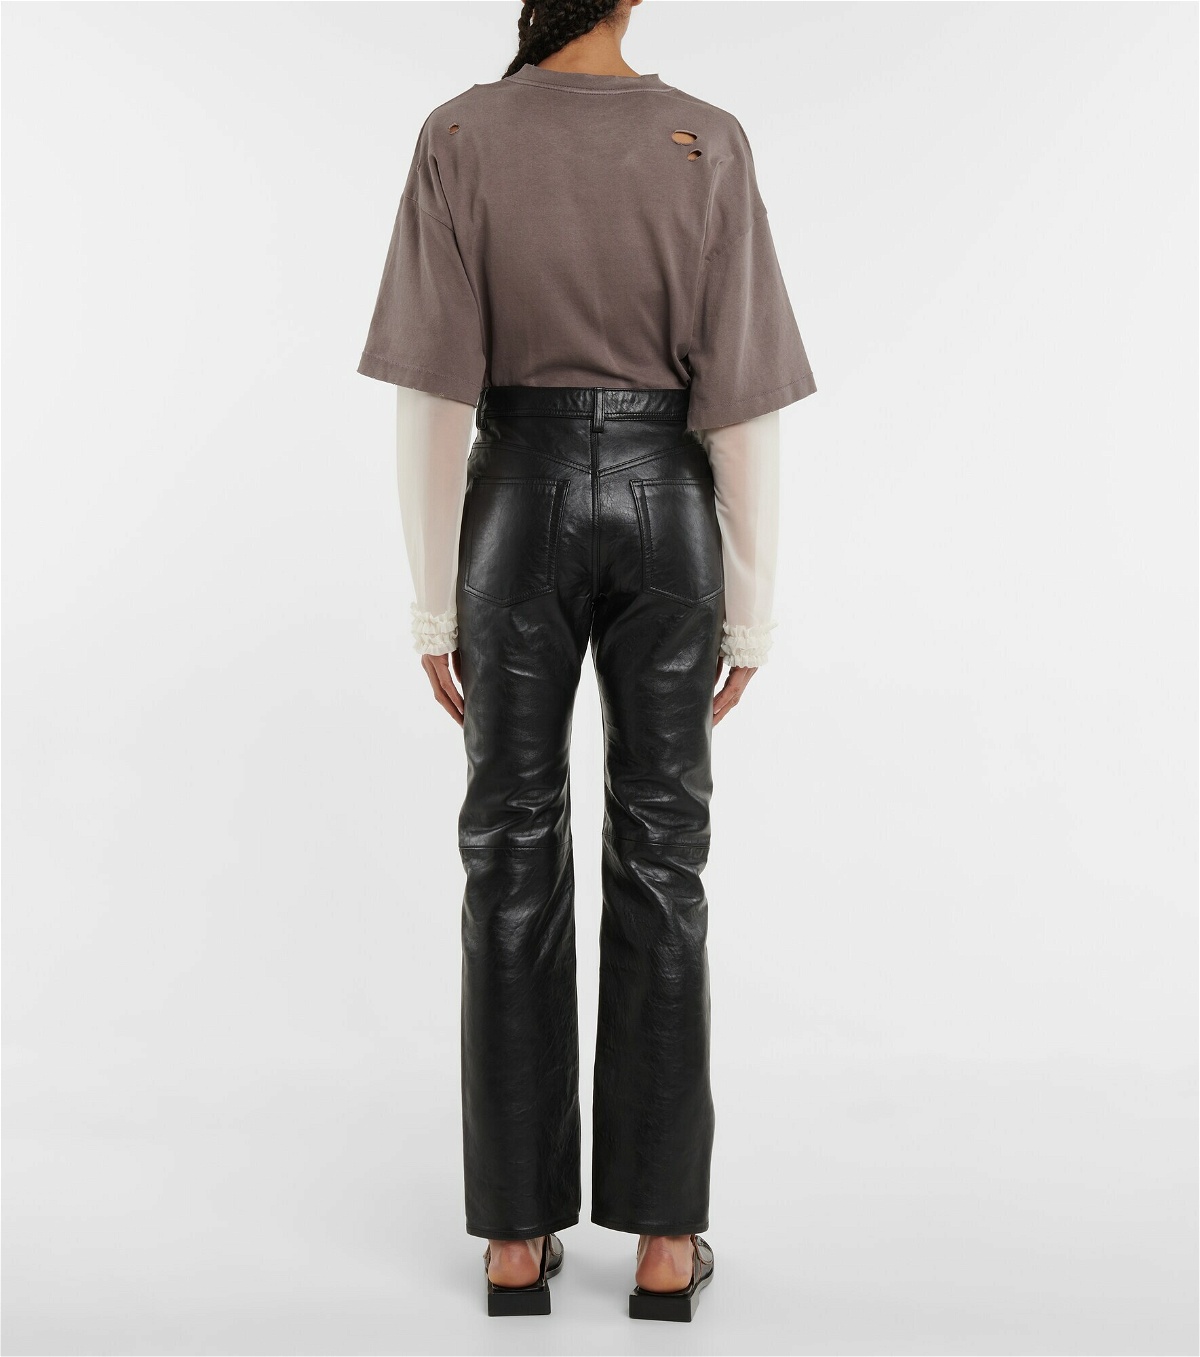 Acne Studios - High-rise flared leather pants Acne Studios